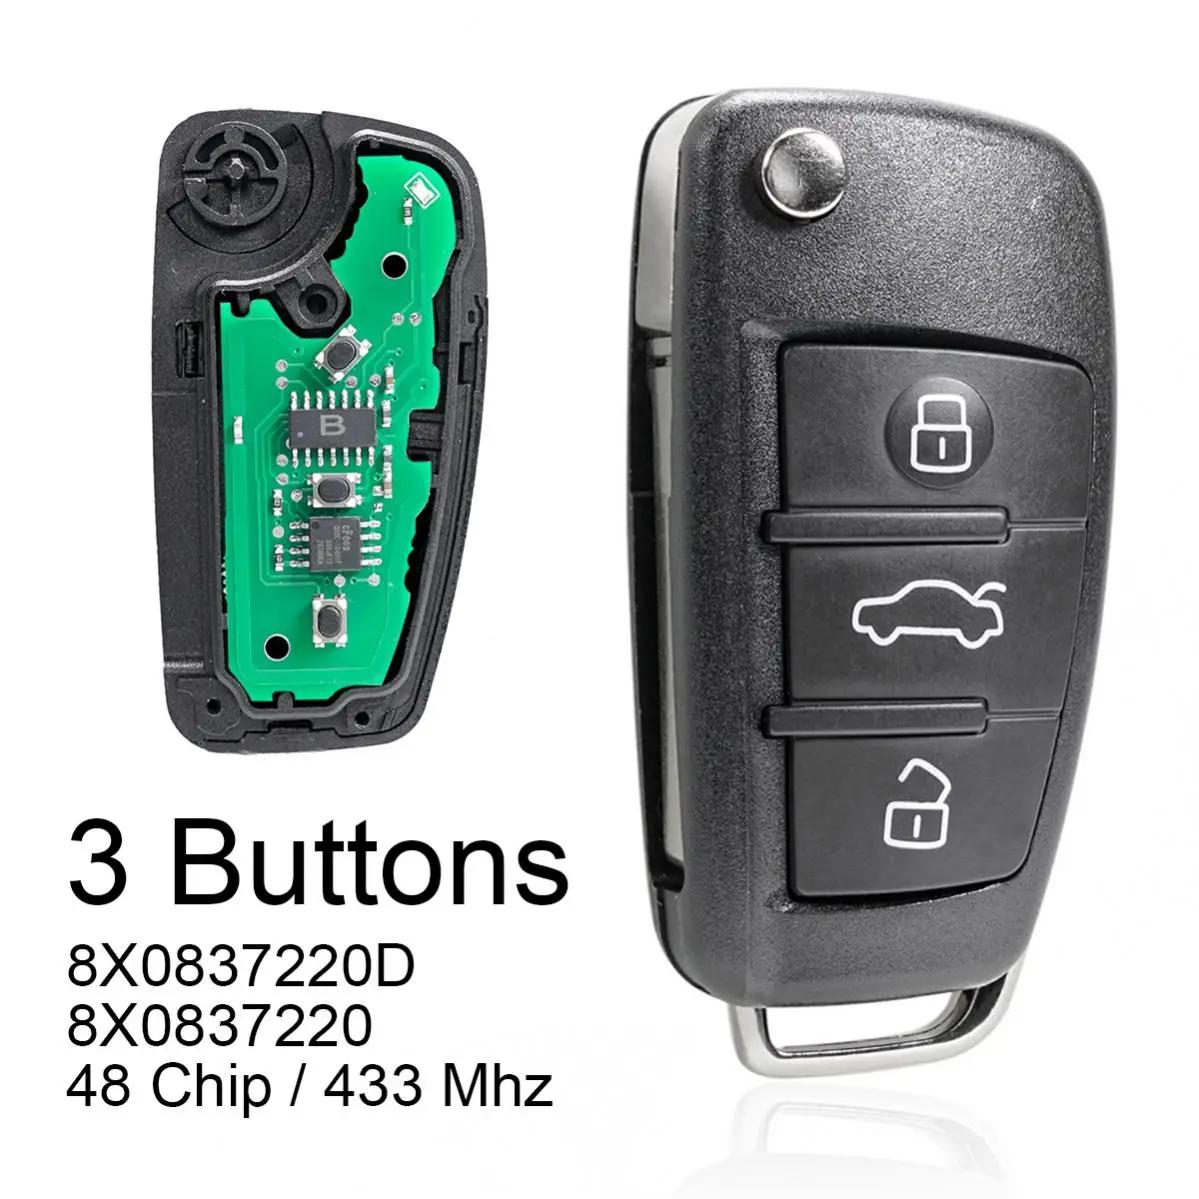 433Mhz 3 Buttons Car Remote Key with ID48 Chip /8X0837220D 8X0837220 for Audi- A1 Q3 S1 2010 2011 2012 2013 2014 2015 2016 2017